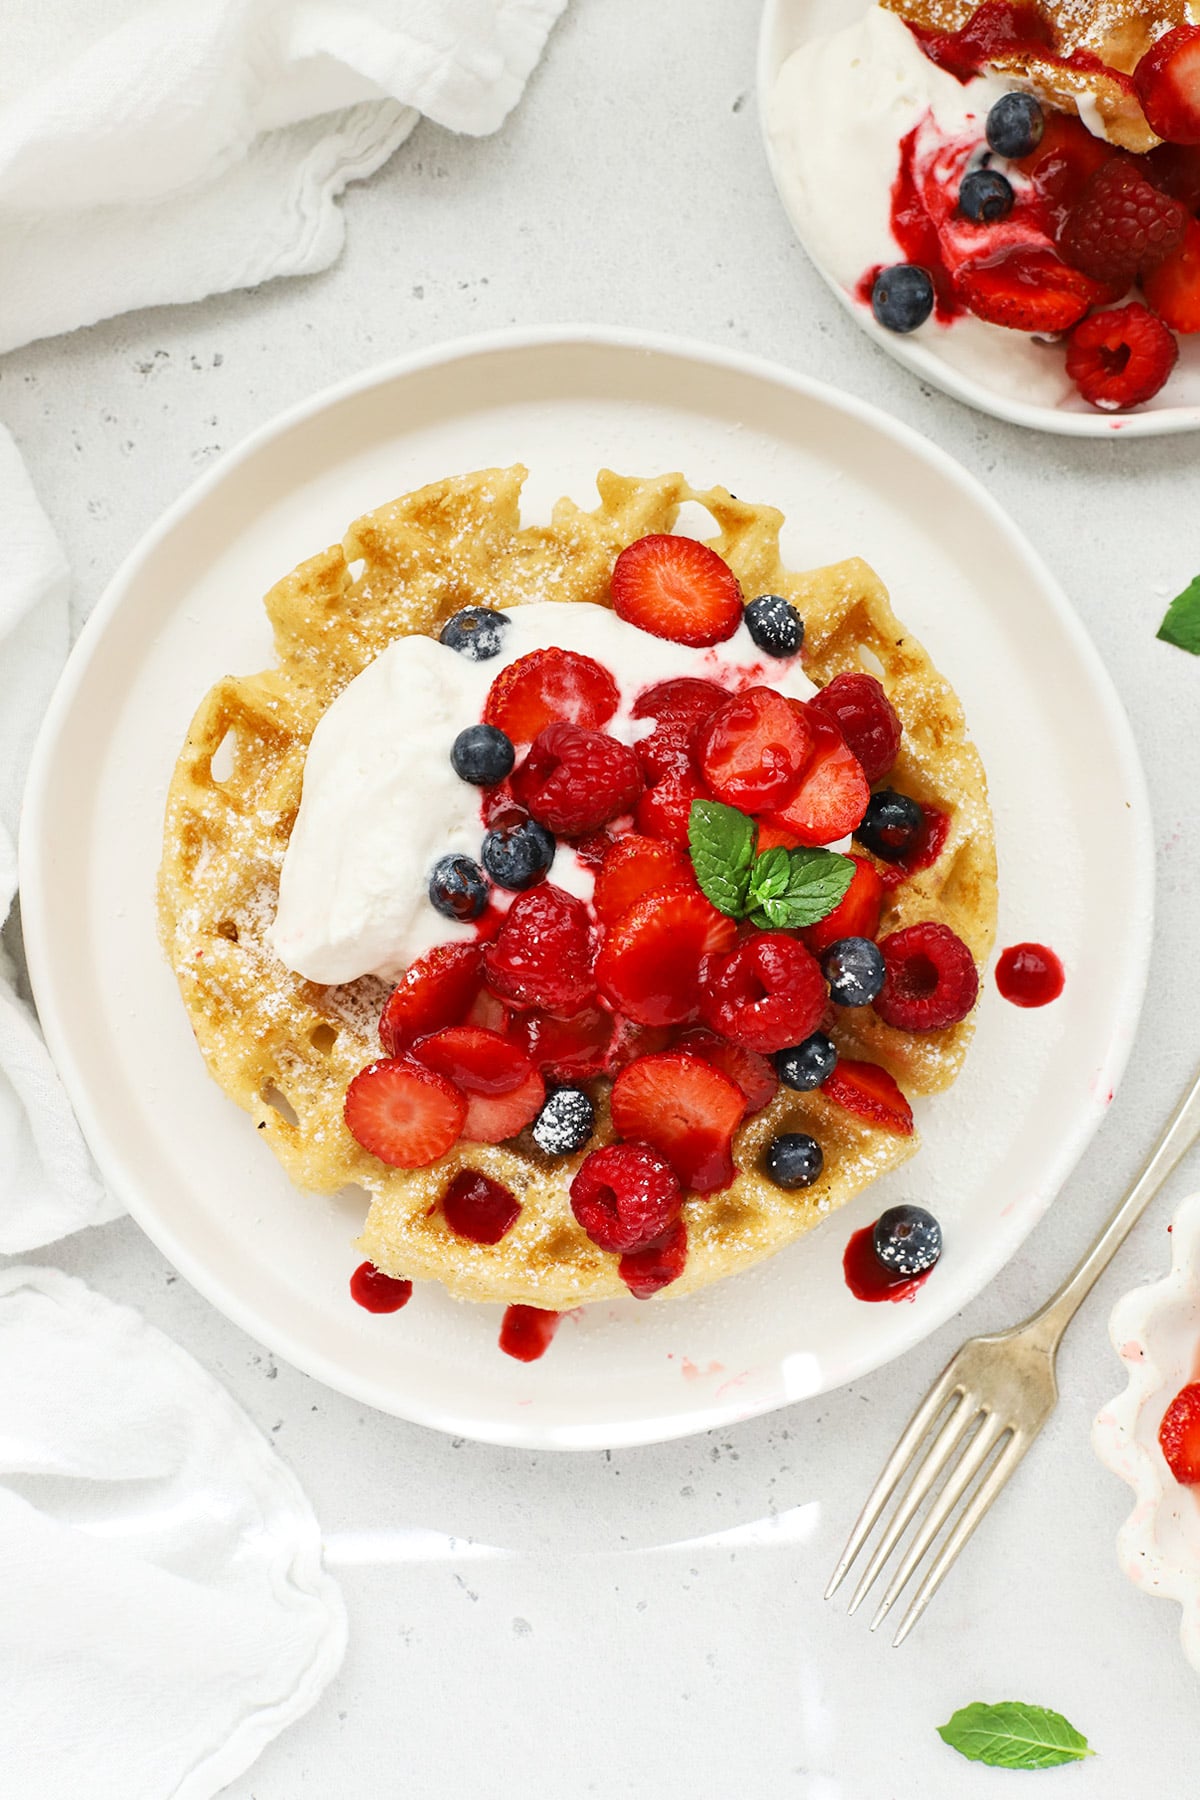 Overhead view of fluffy gluten-free Belgian waffles topped with whipped cream and berries